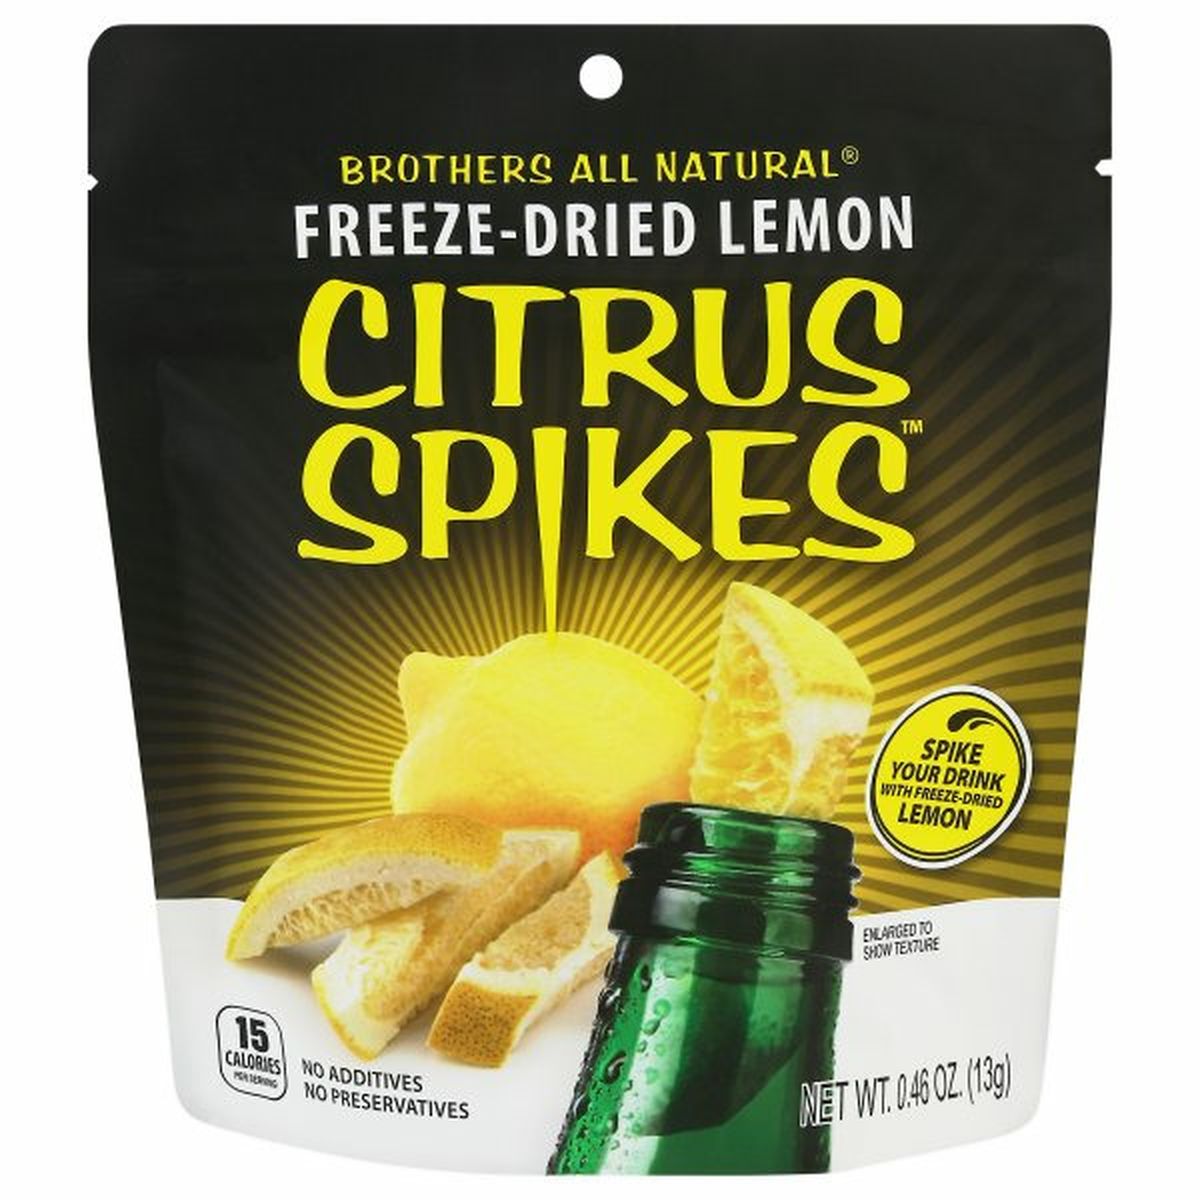 Calories in Brothers All Natural Citrus Spikes Lemon, Freeze-Dried